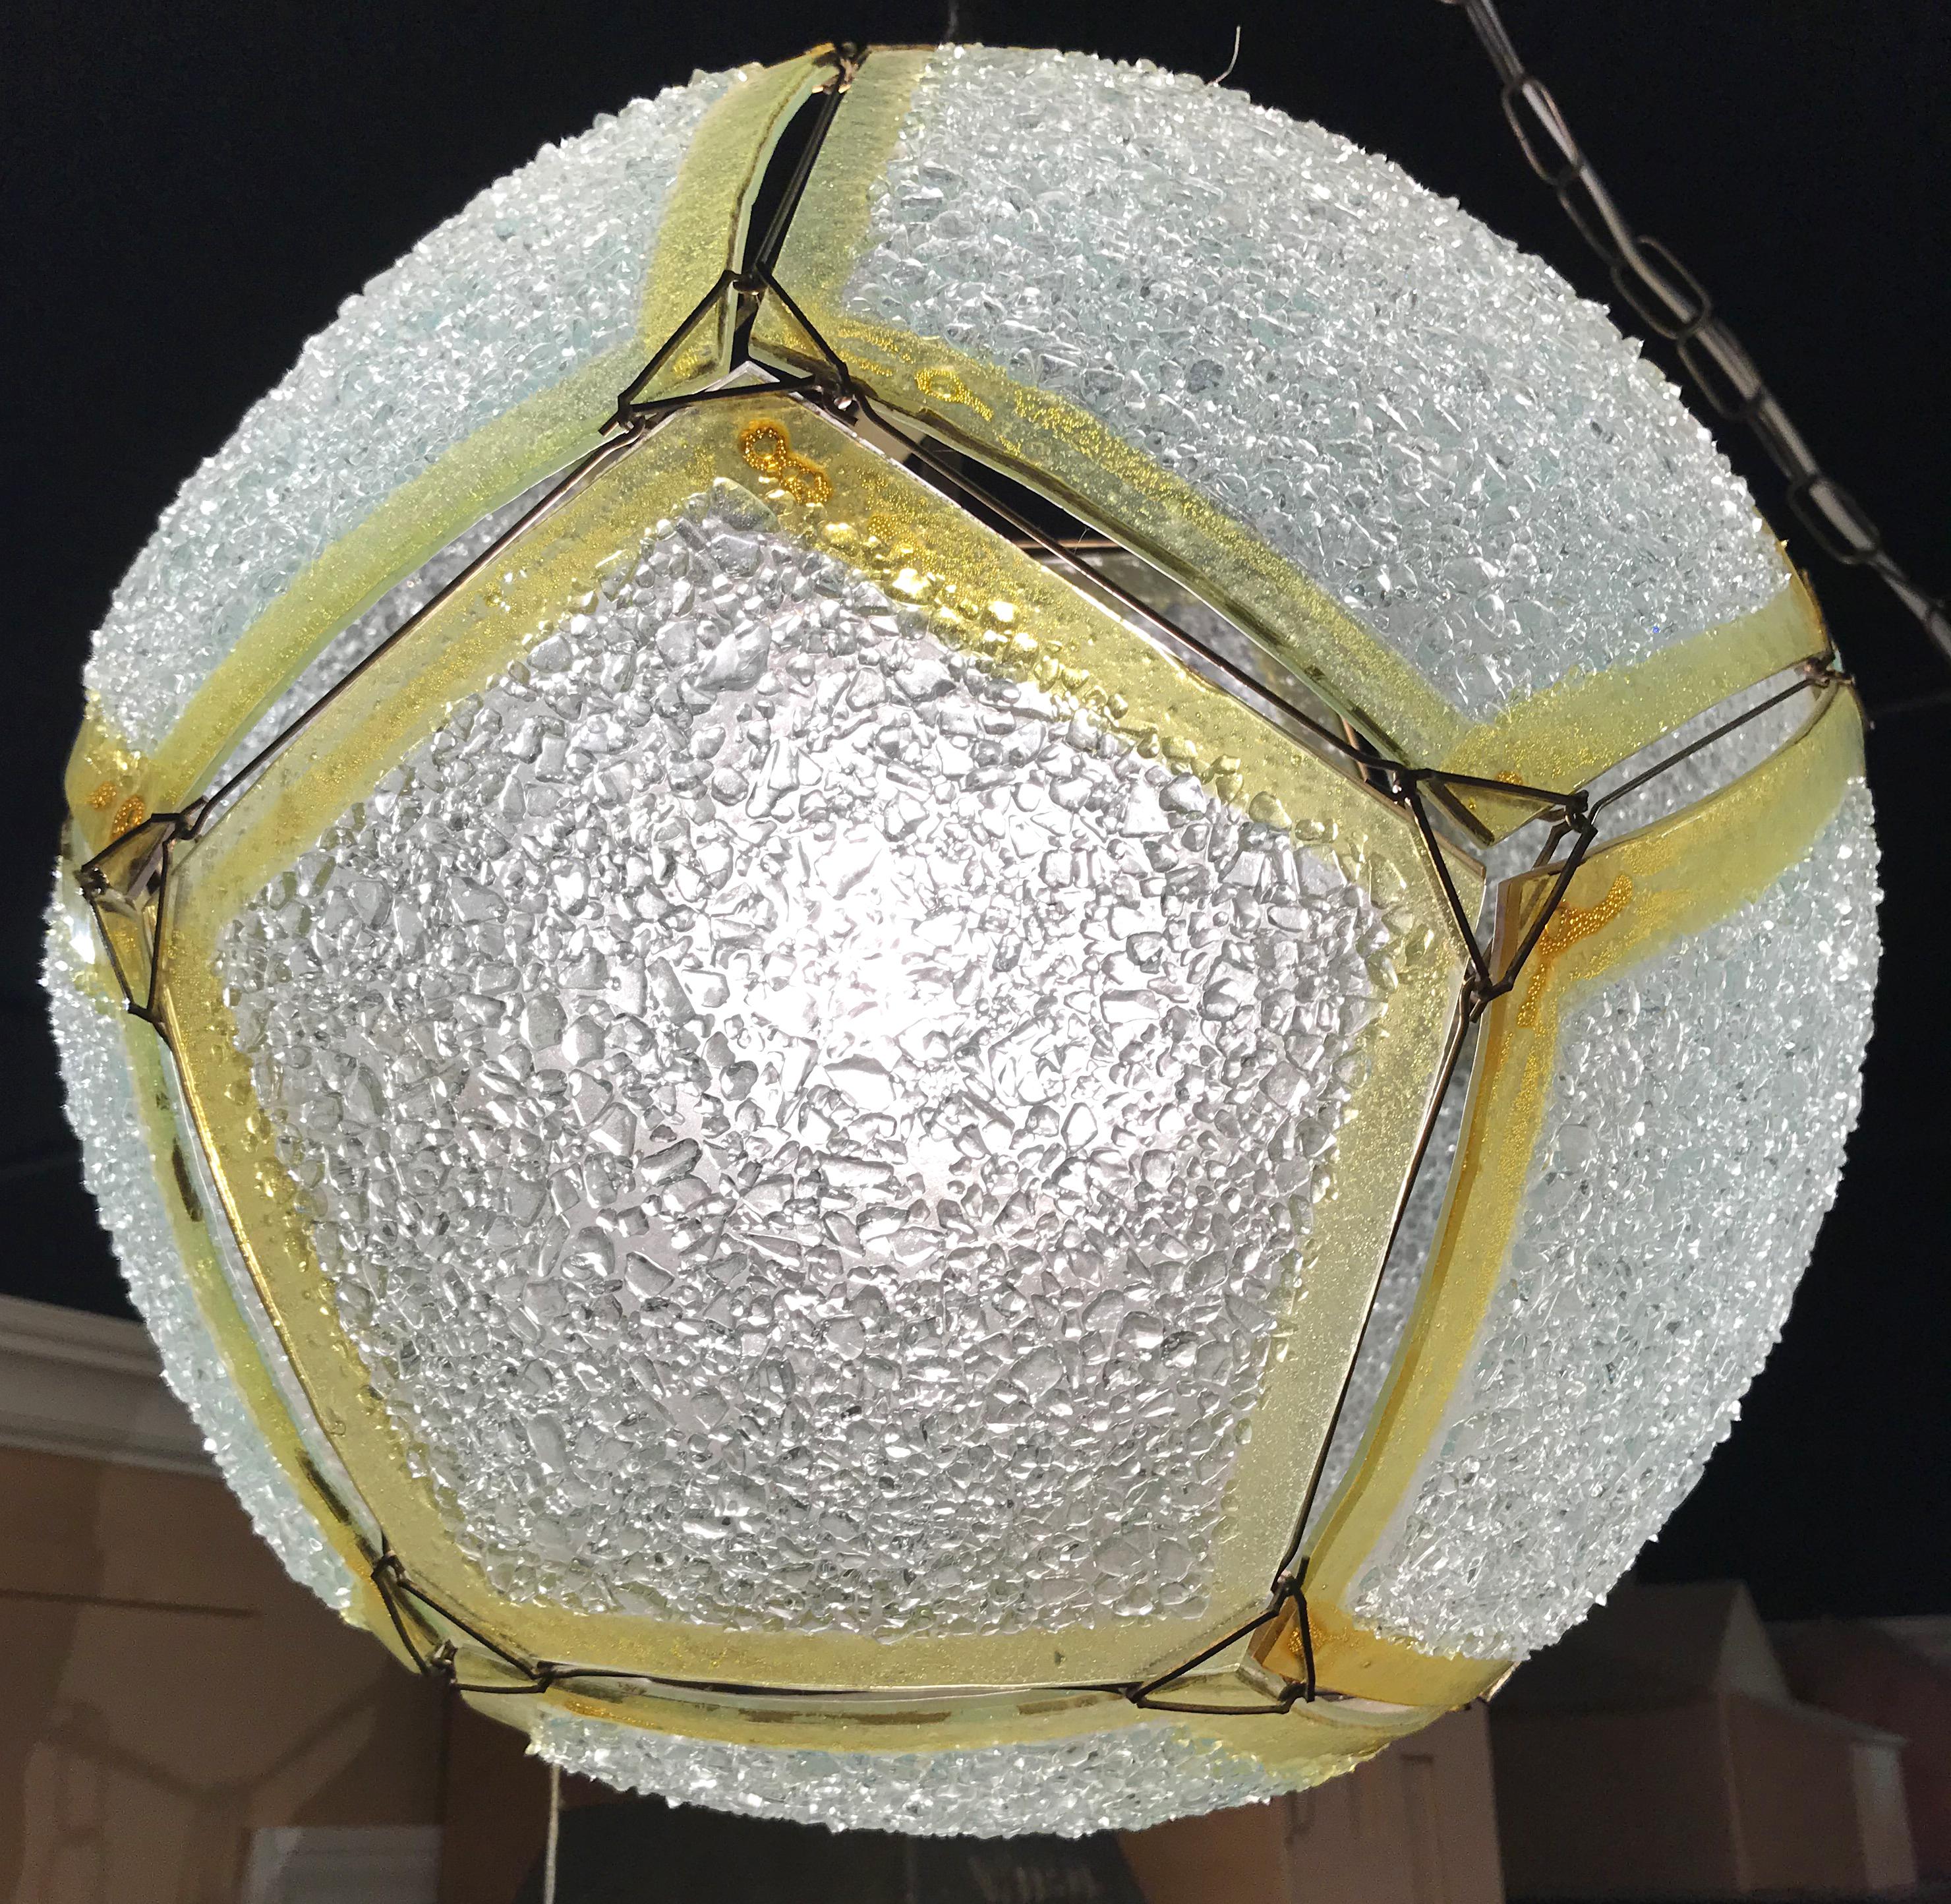 A fabulous art glass textured or frosted sphere pendant light with textured pentagonal panels held together with a series of metal triangular fasteners with metal lines with end hooks running between them. Each pentagonal panel has clear textured